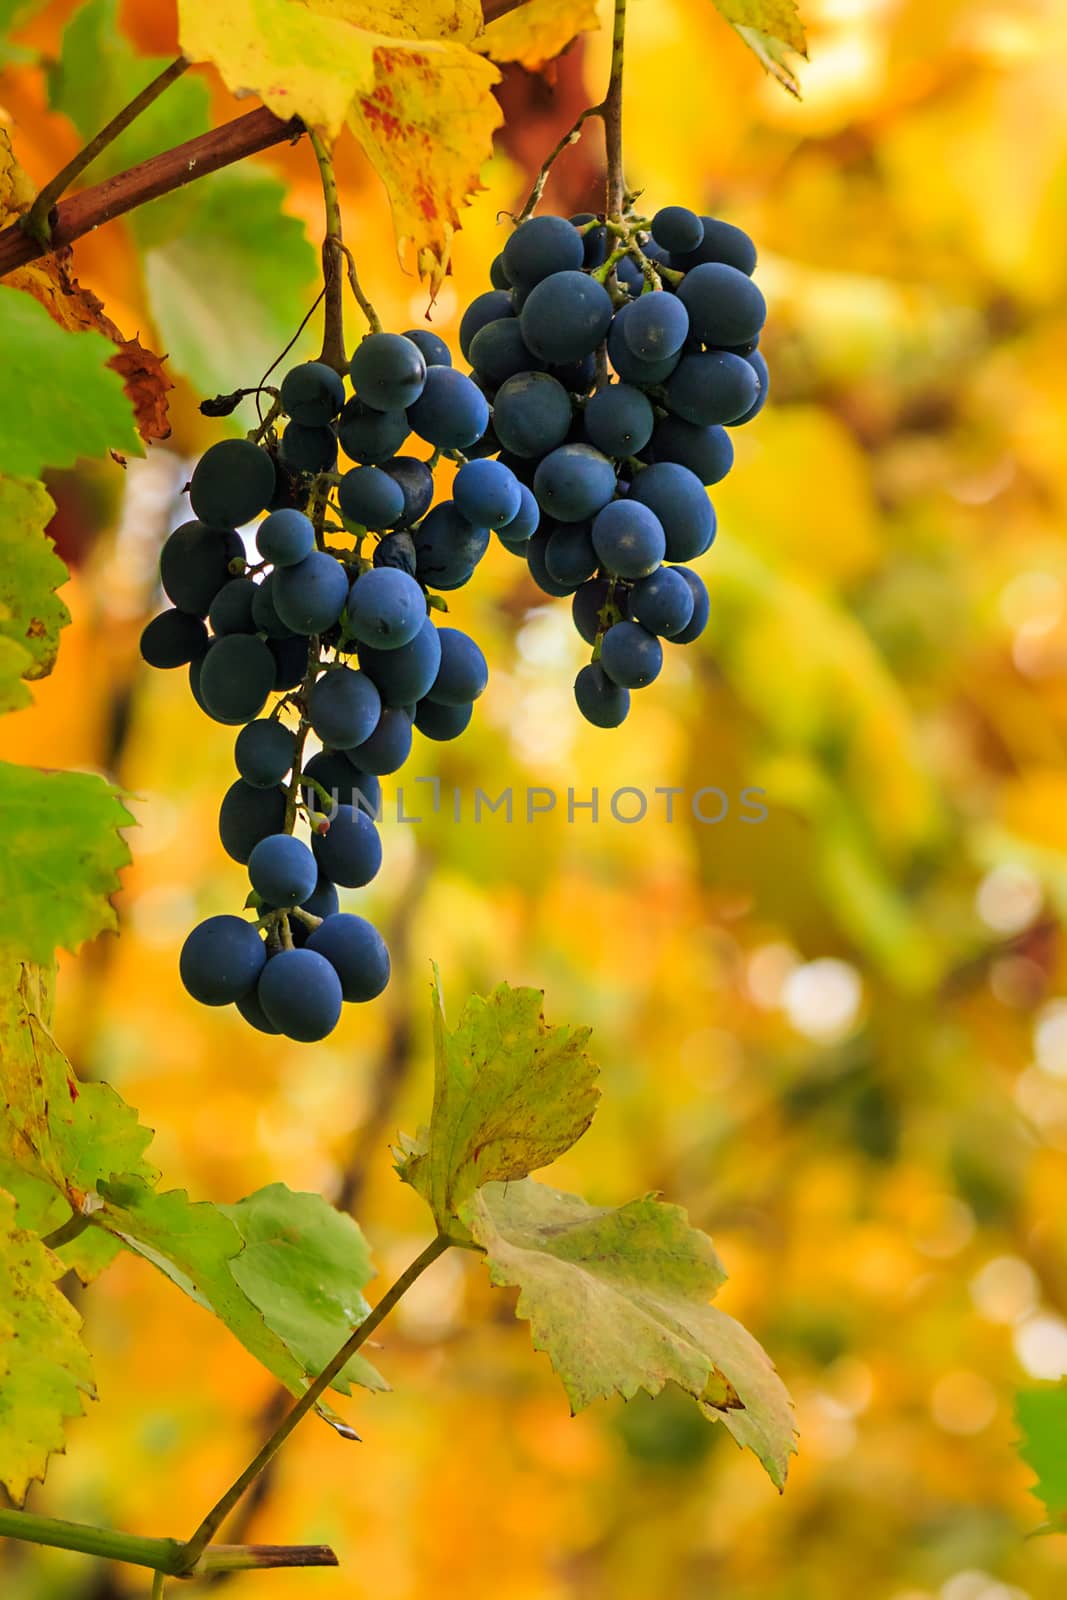 fine sweet grapes on a foliage background  by Pellinni